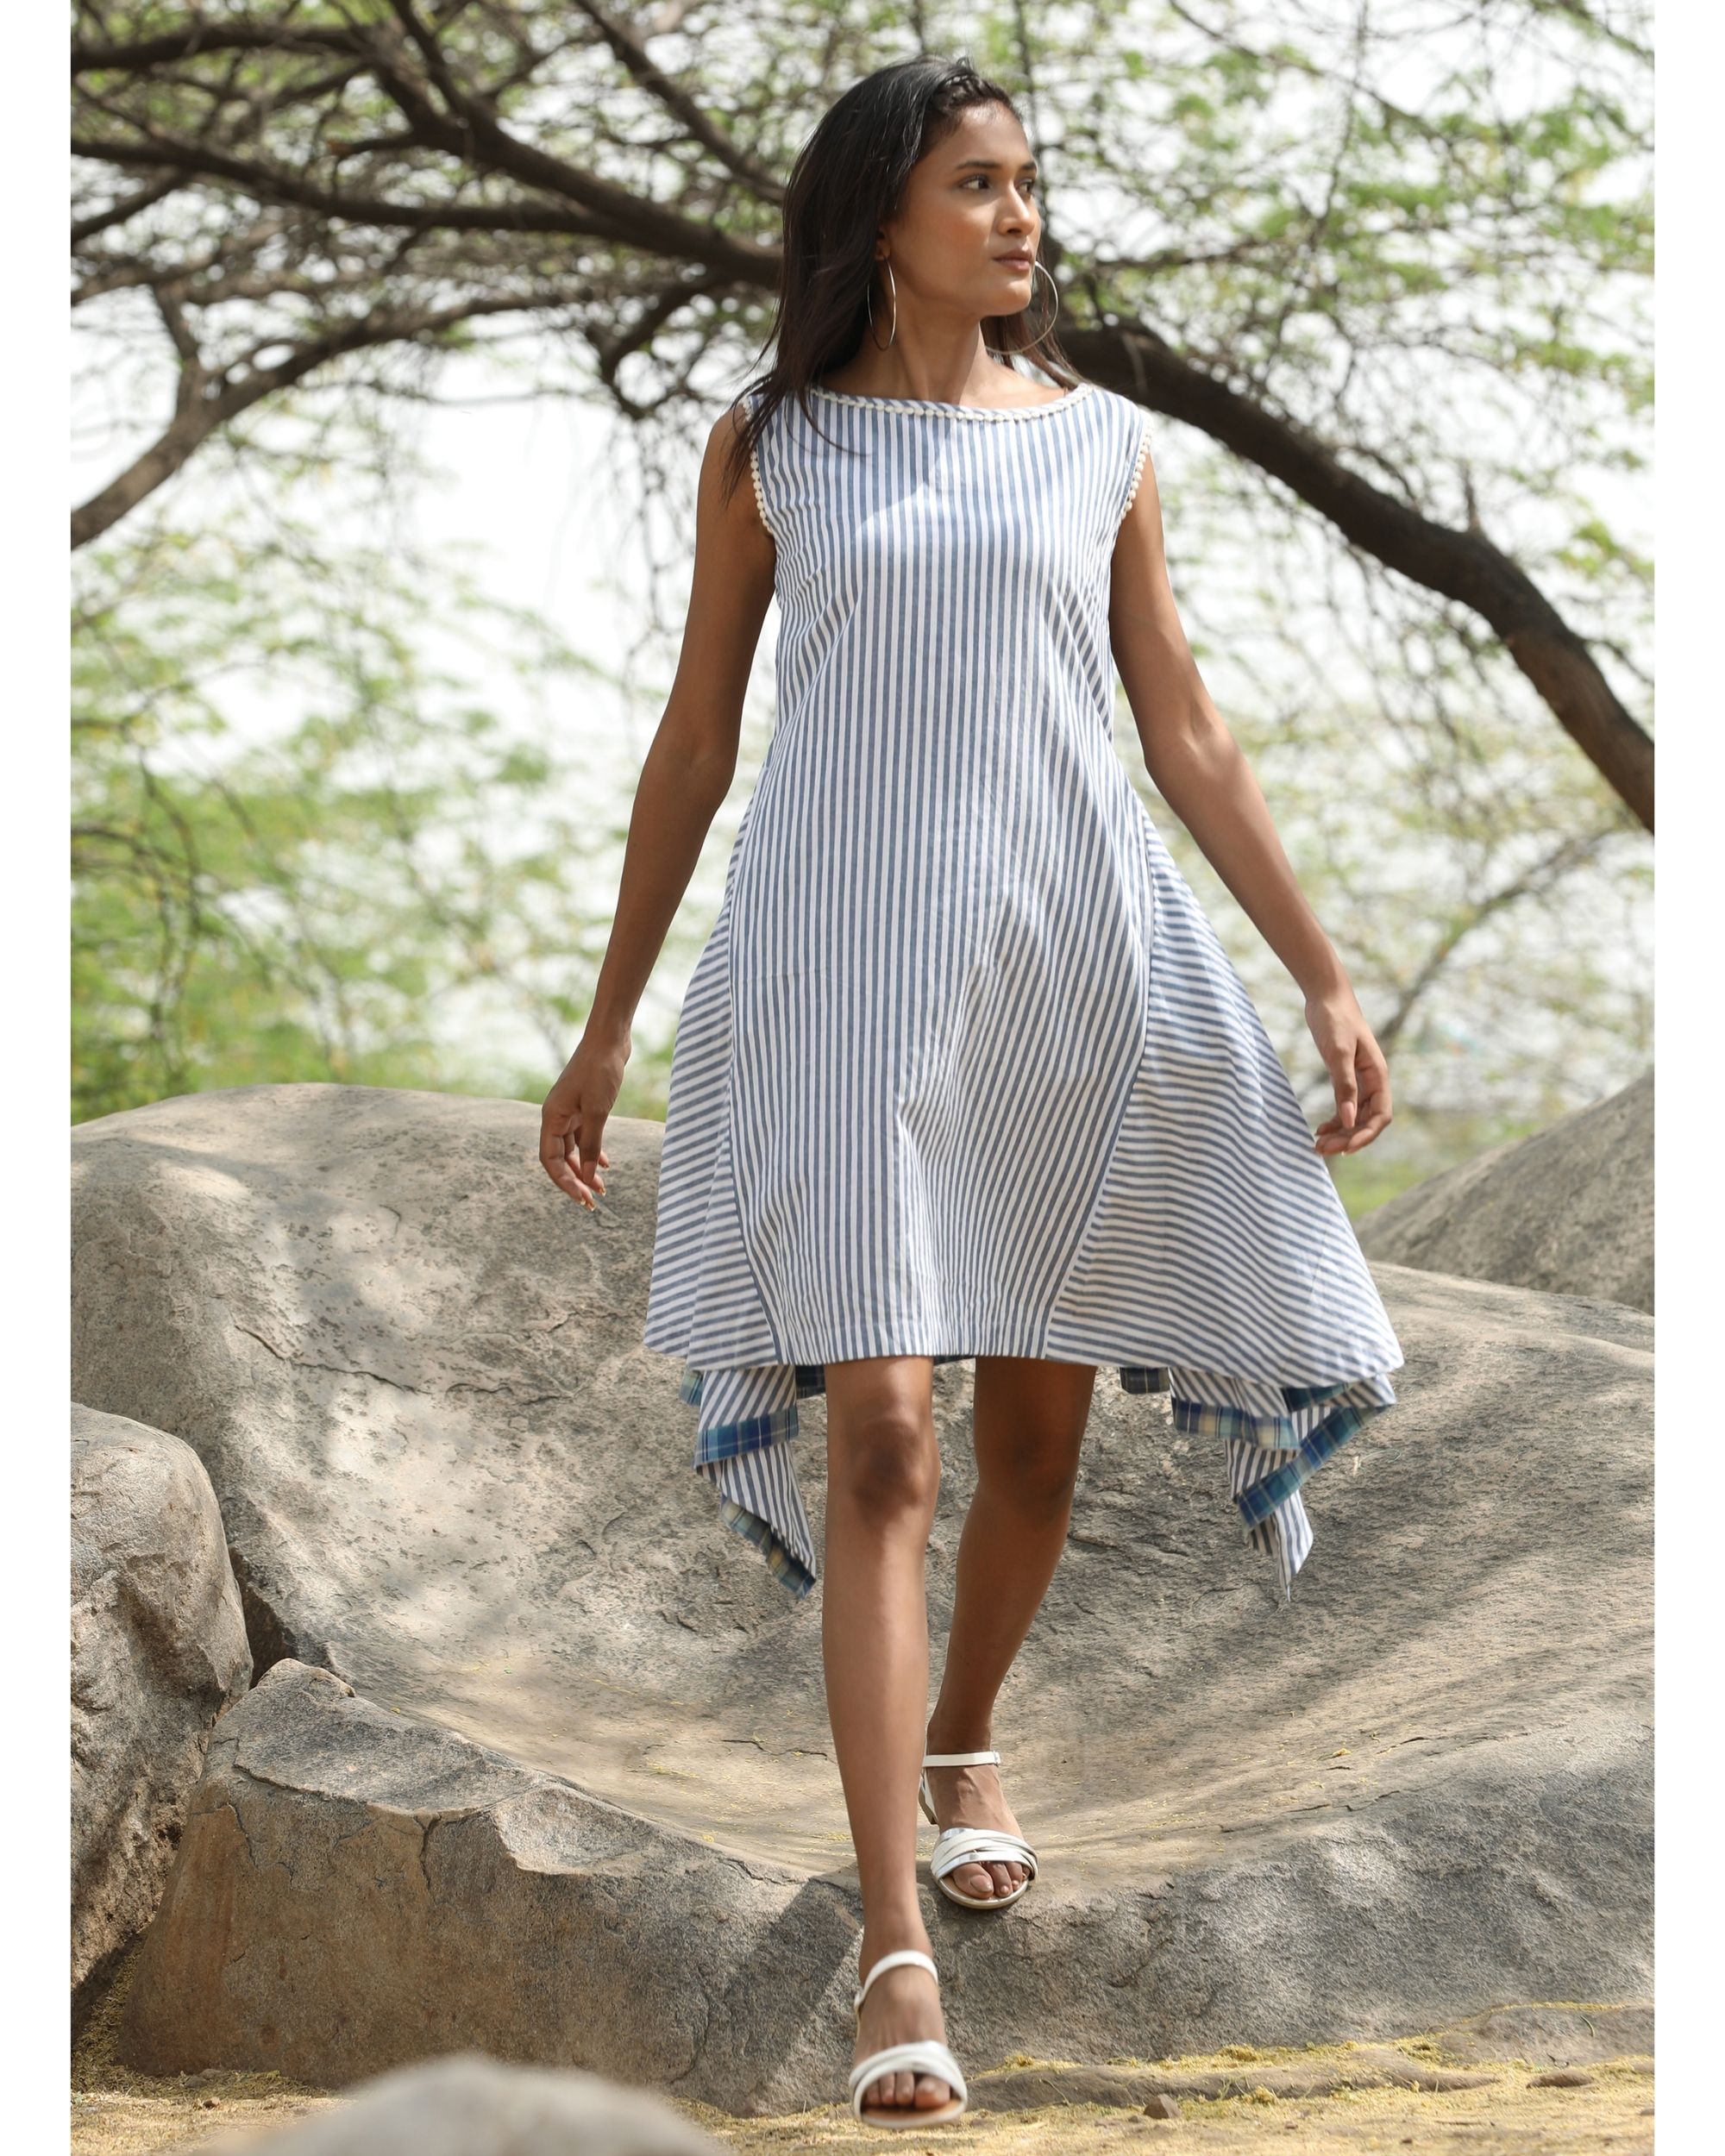 Blue and white cotton dress